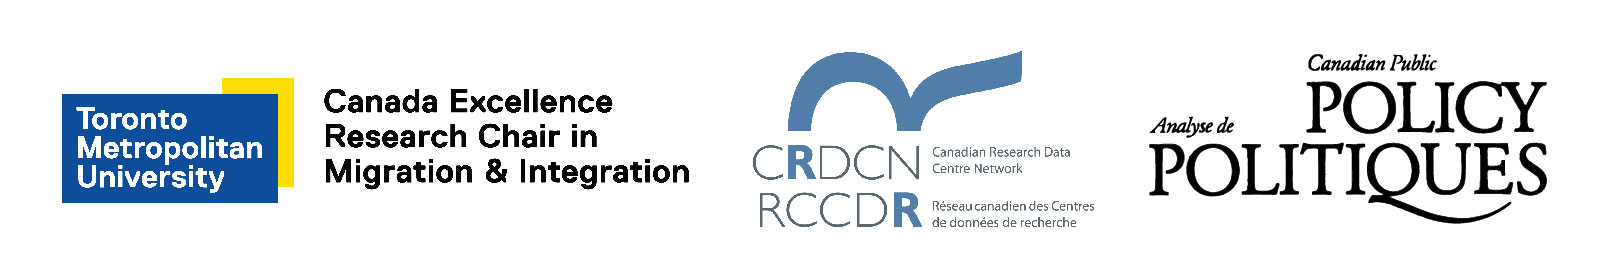 CERC Migration logo, Canadian Research Data Centre Network logo, Canadian Public Policy logo